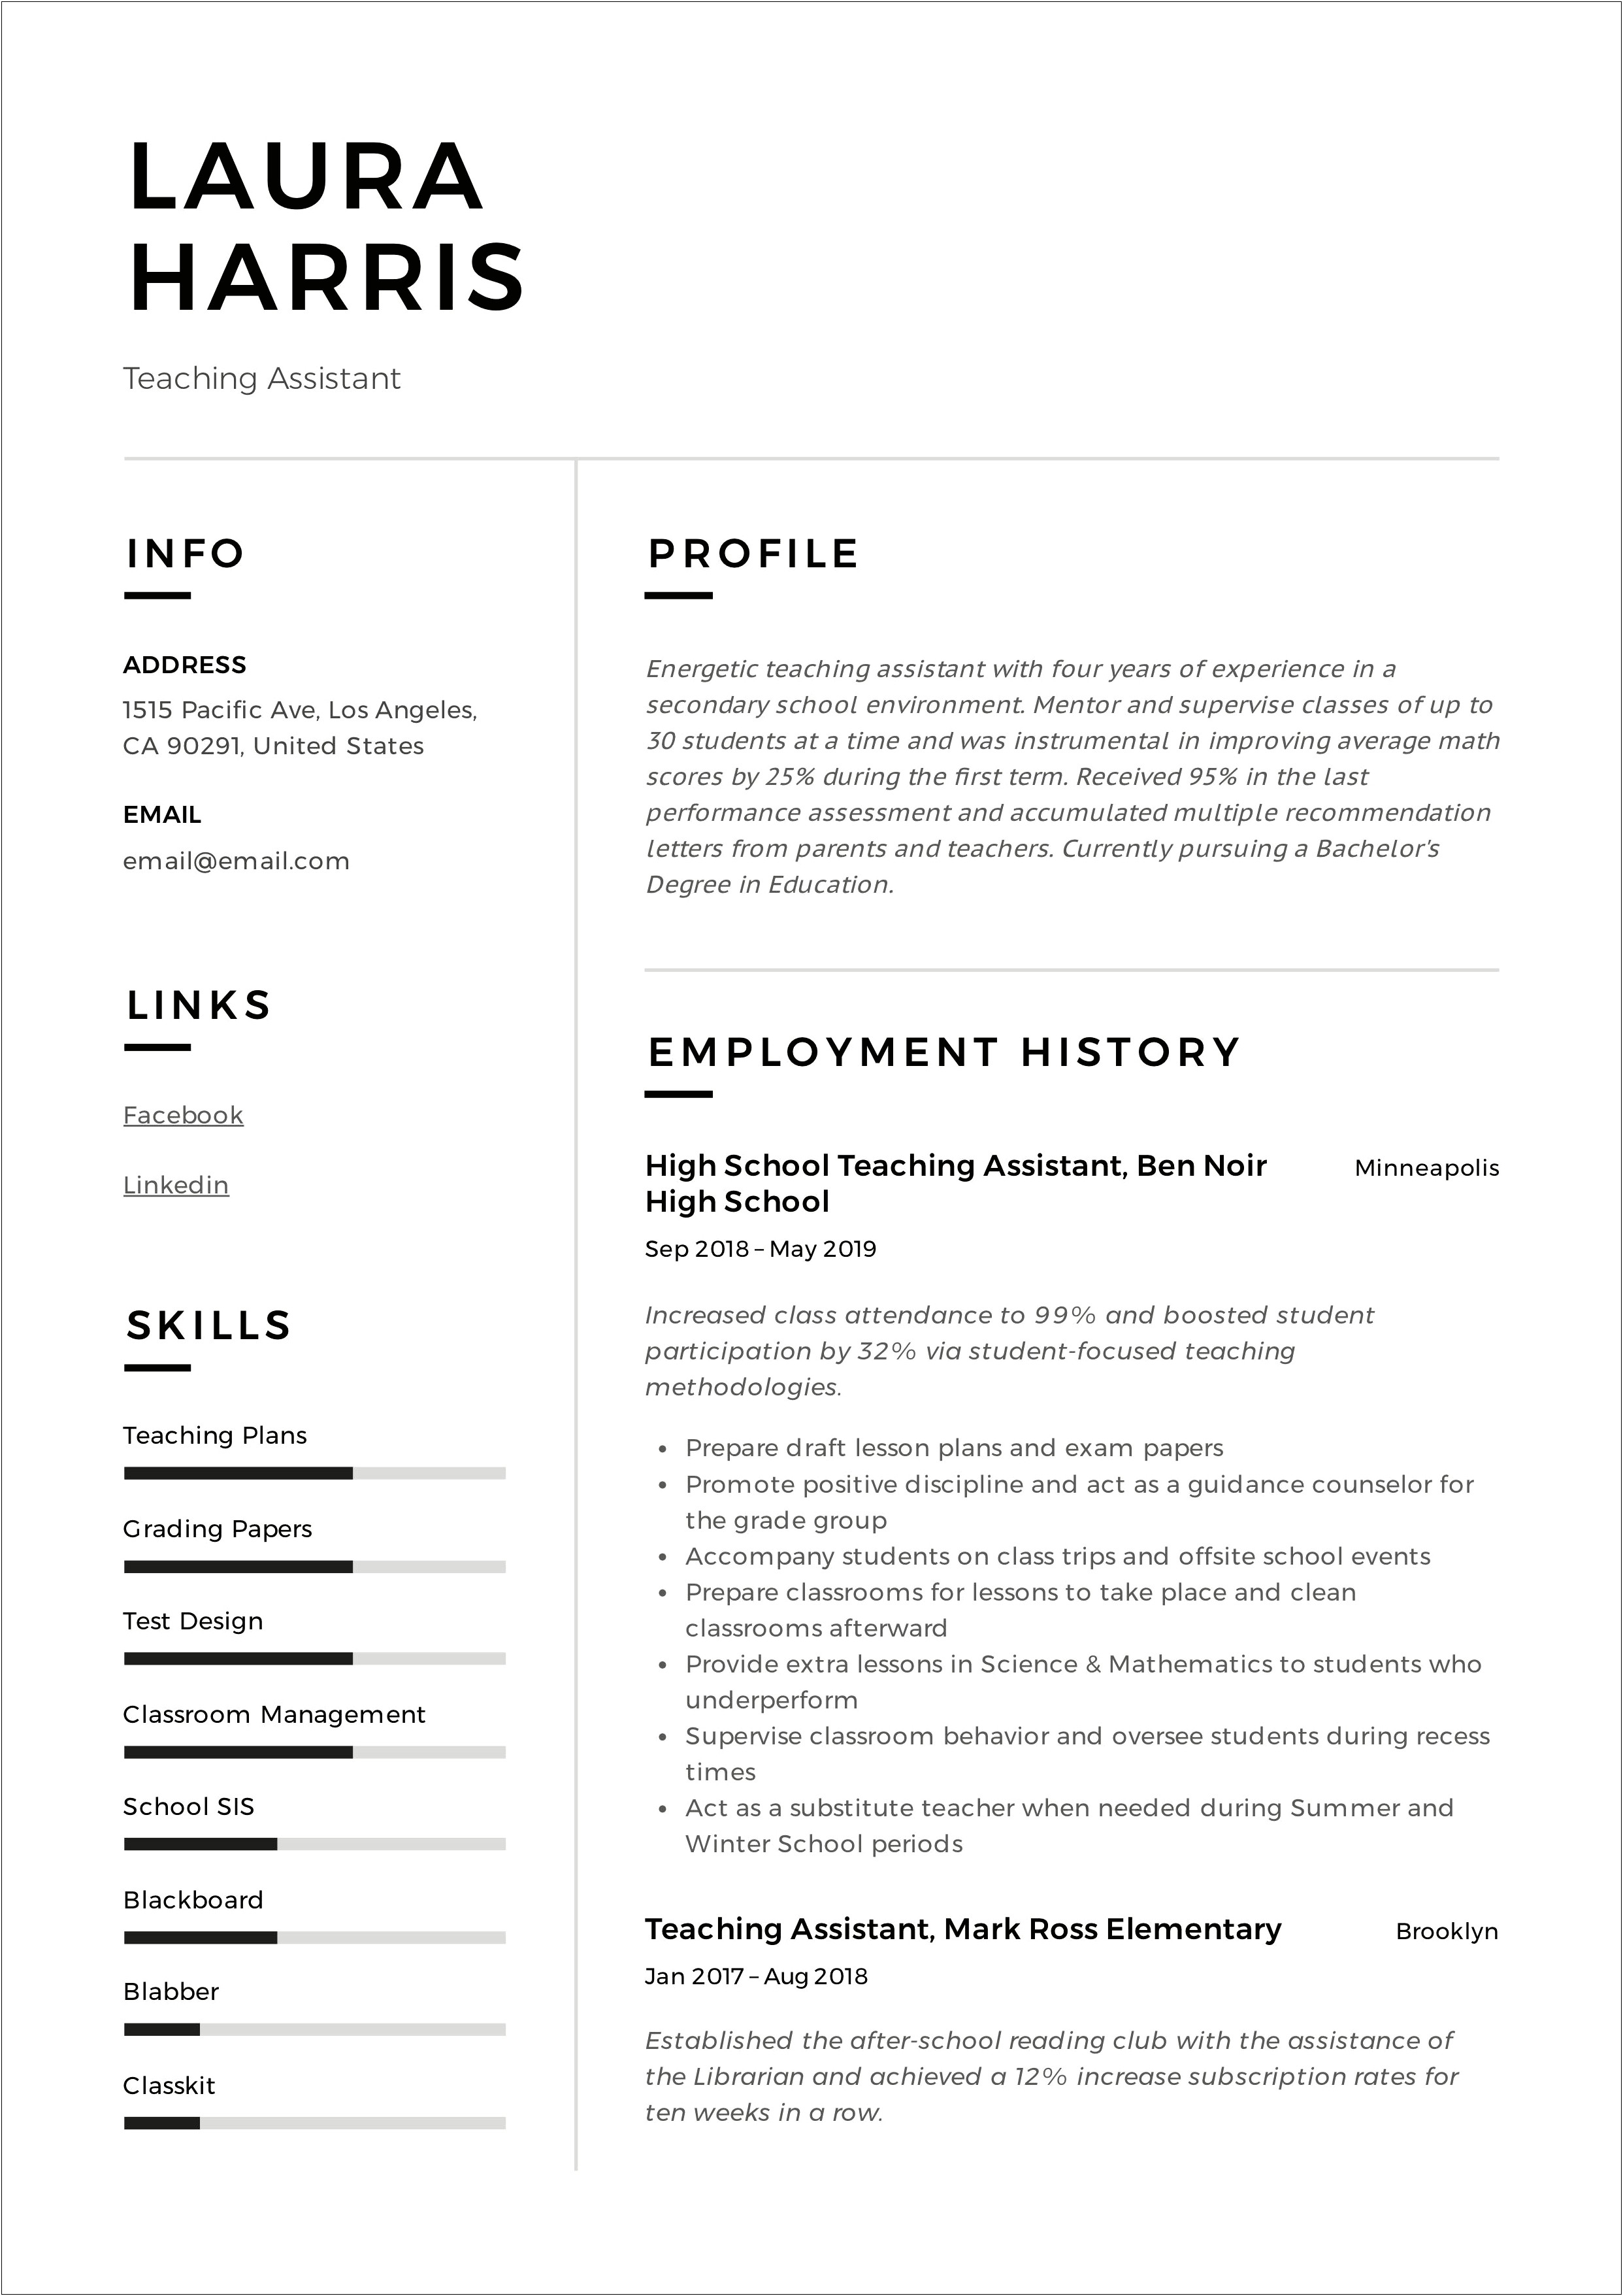 Profile Resume Examples For Teaching